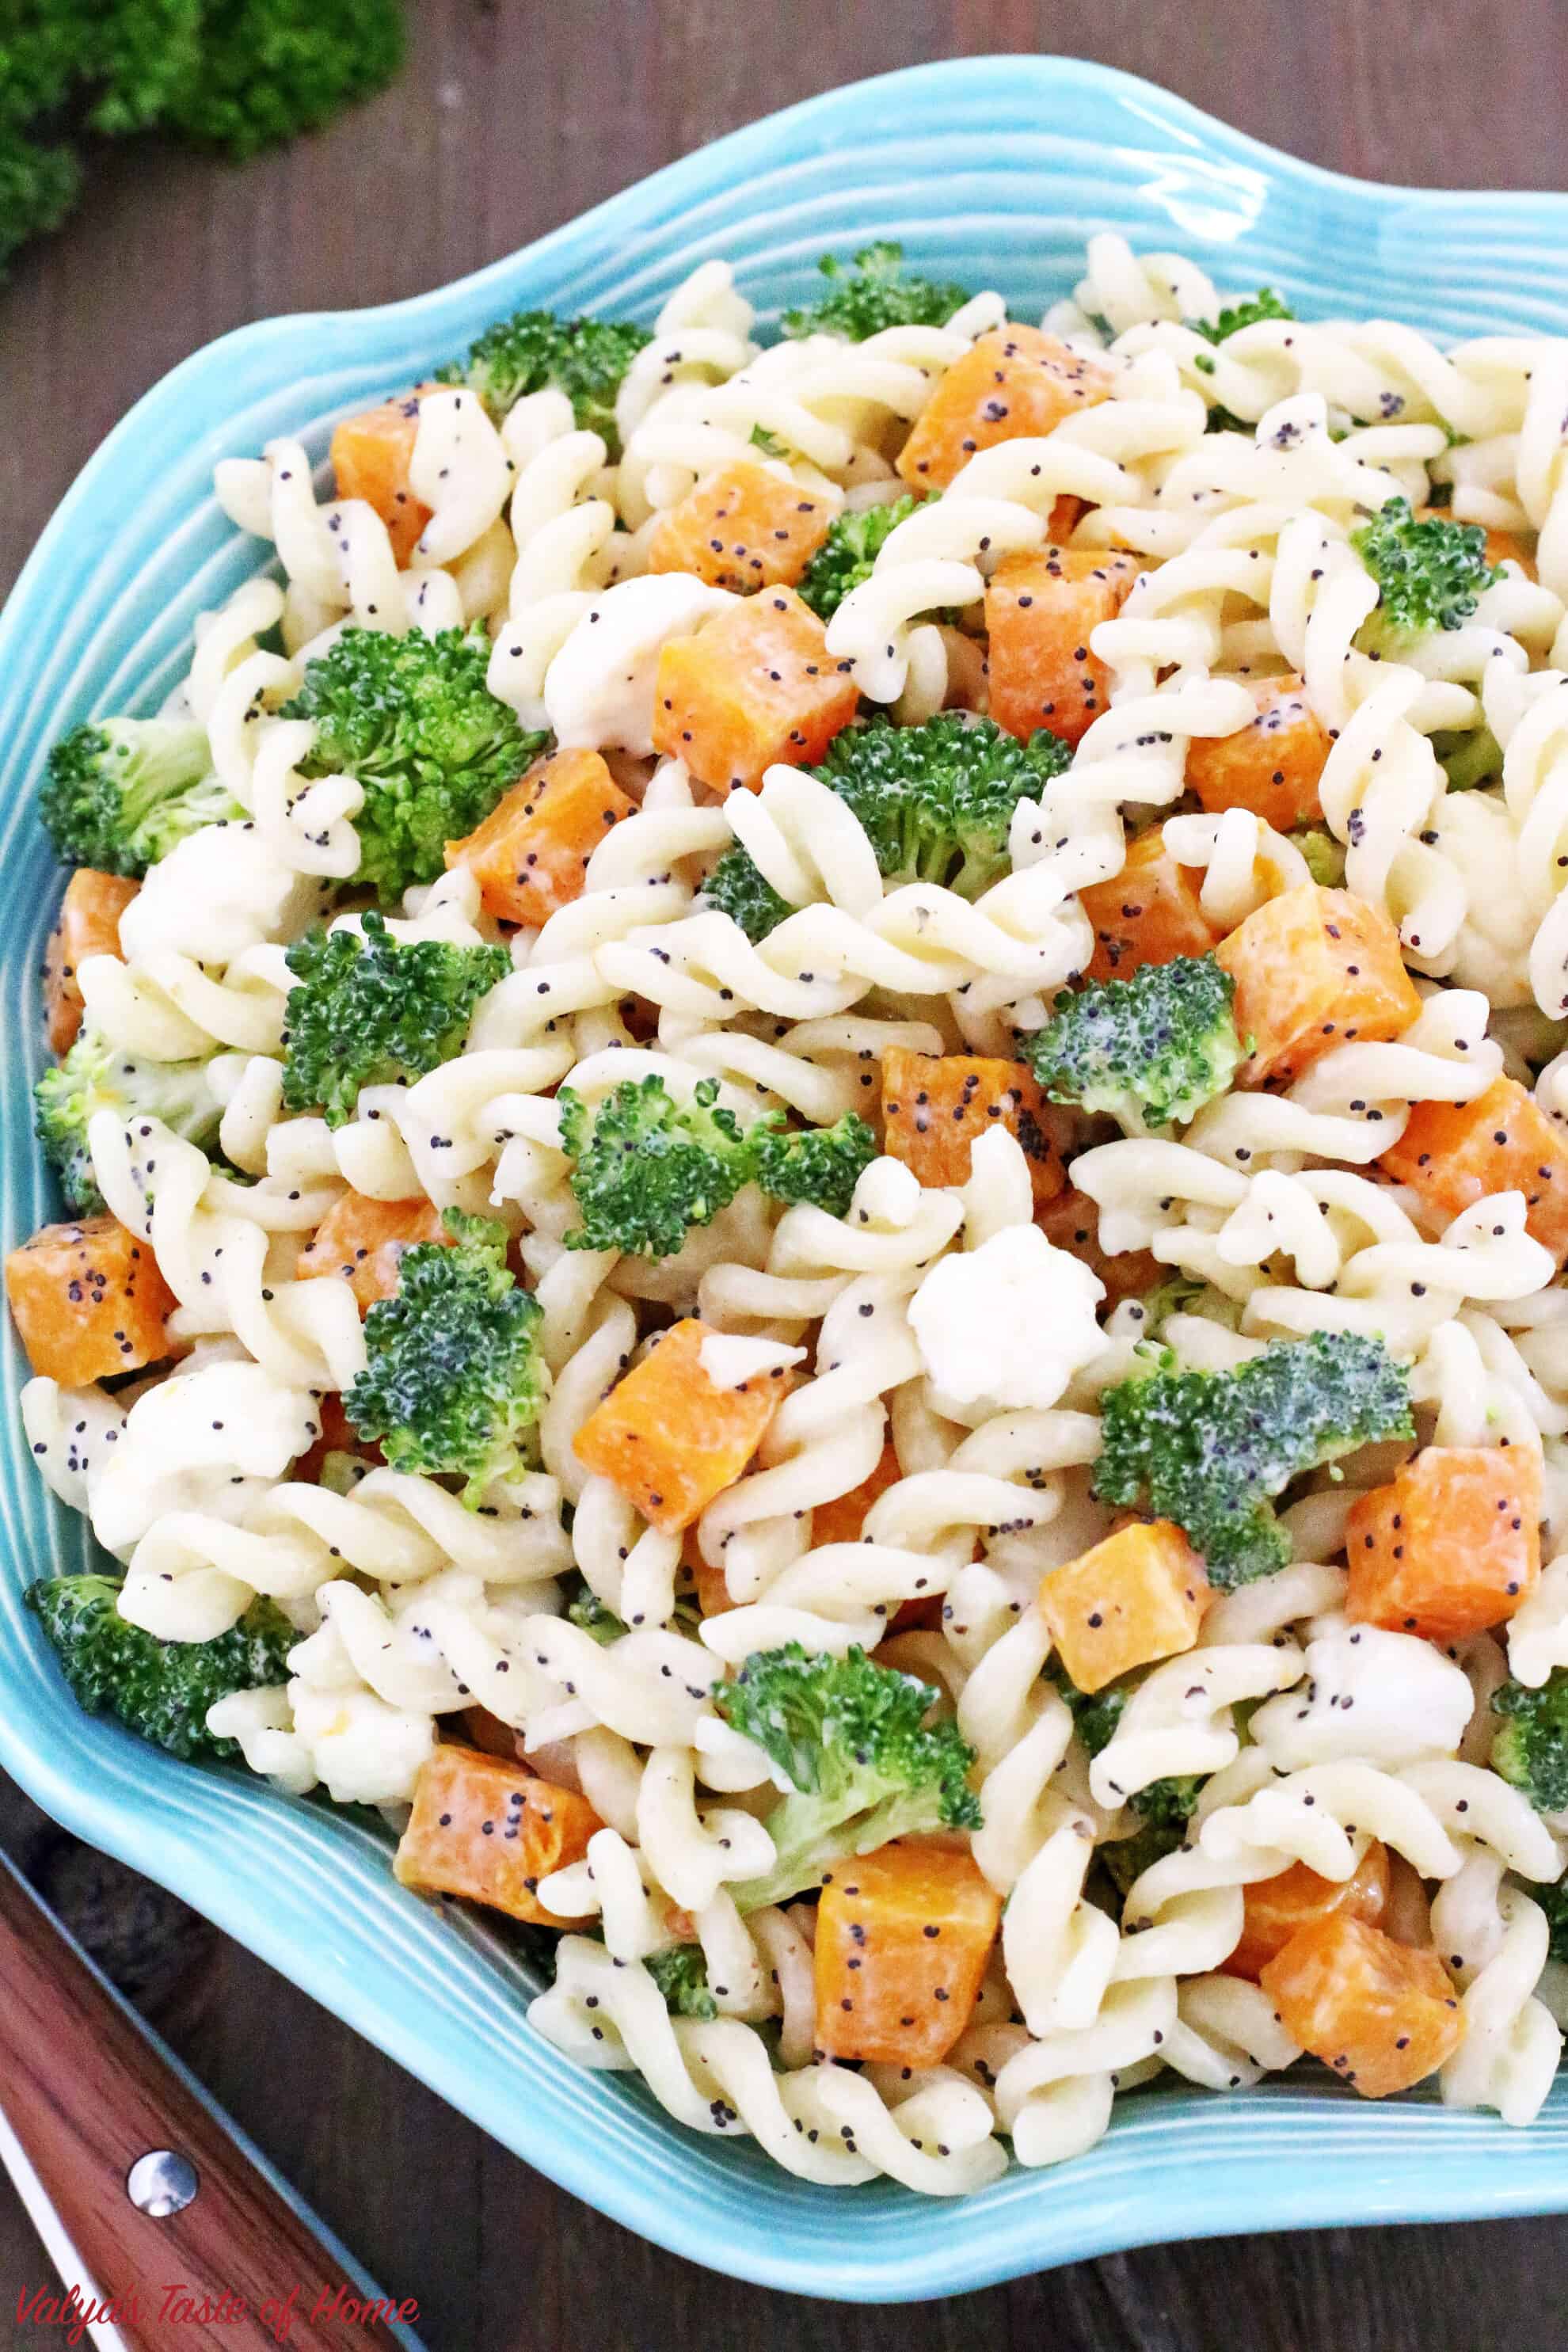 This make ahead, and crowd-pleasing of the Butternut Squash Pasta Salad side dis is another gem in a Thanksgiving spread. Or any gathering, really. Organic pasta tossed with fresh broccoli, cauliflower, roasted butternut squash and dressed with homemade ranch makes this salad taste absolutely incredible! #butternutsquashpastasalad #winterpastasalad #thanksgivingpastasalad #coldfallpastasalad